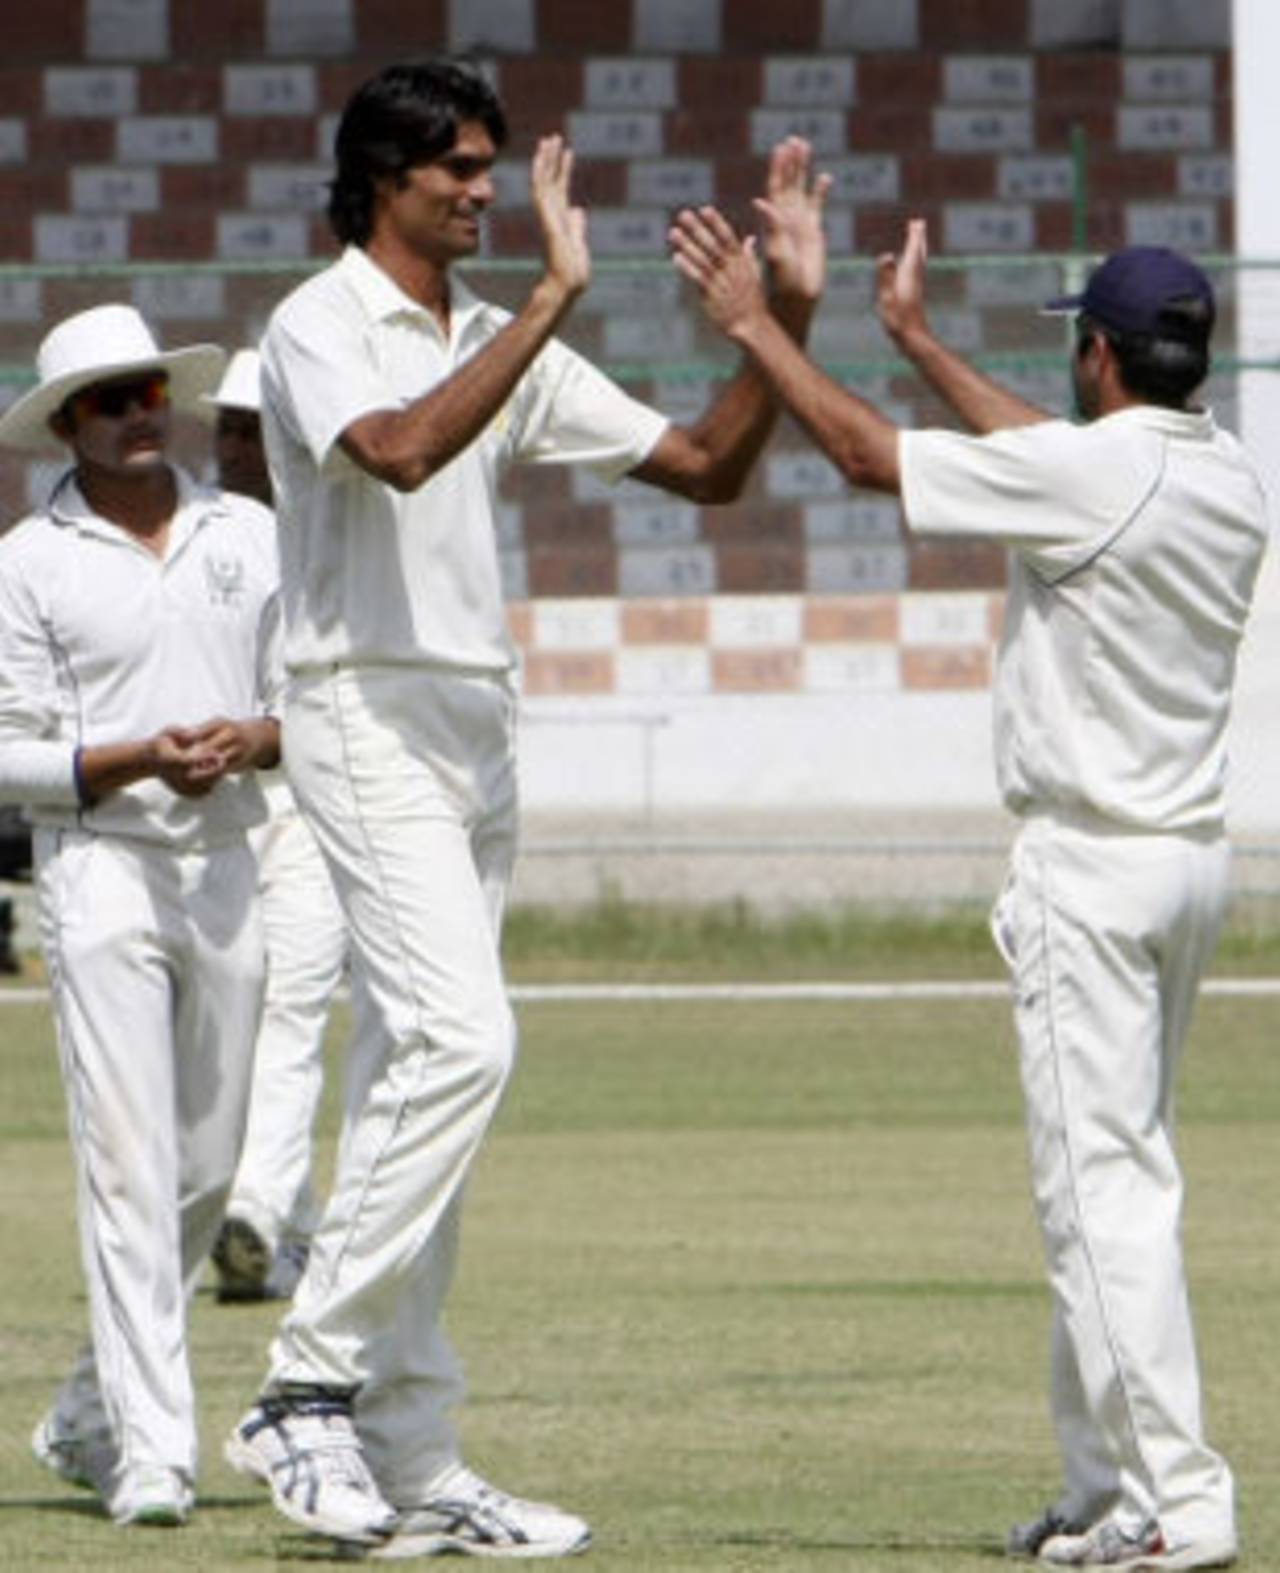 Mohammad Irfan's participation in the IPL depends on the BCCI's approval&nbsp;&nbsp;&bull;&nbsp;&nbsp;Associated Press